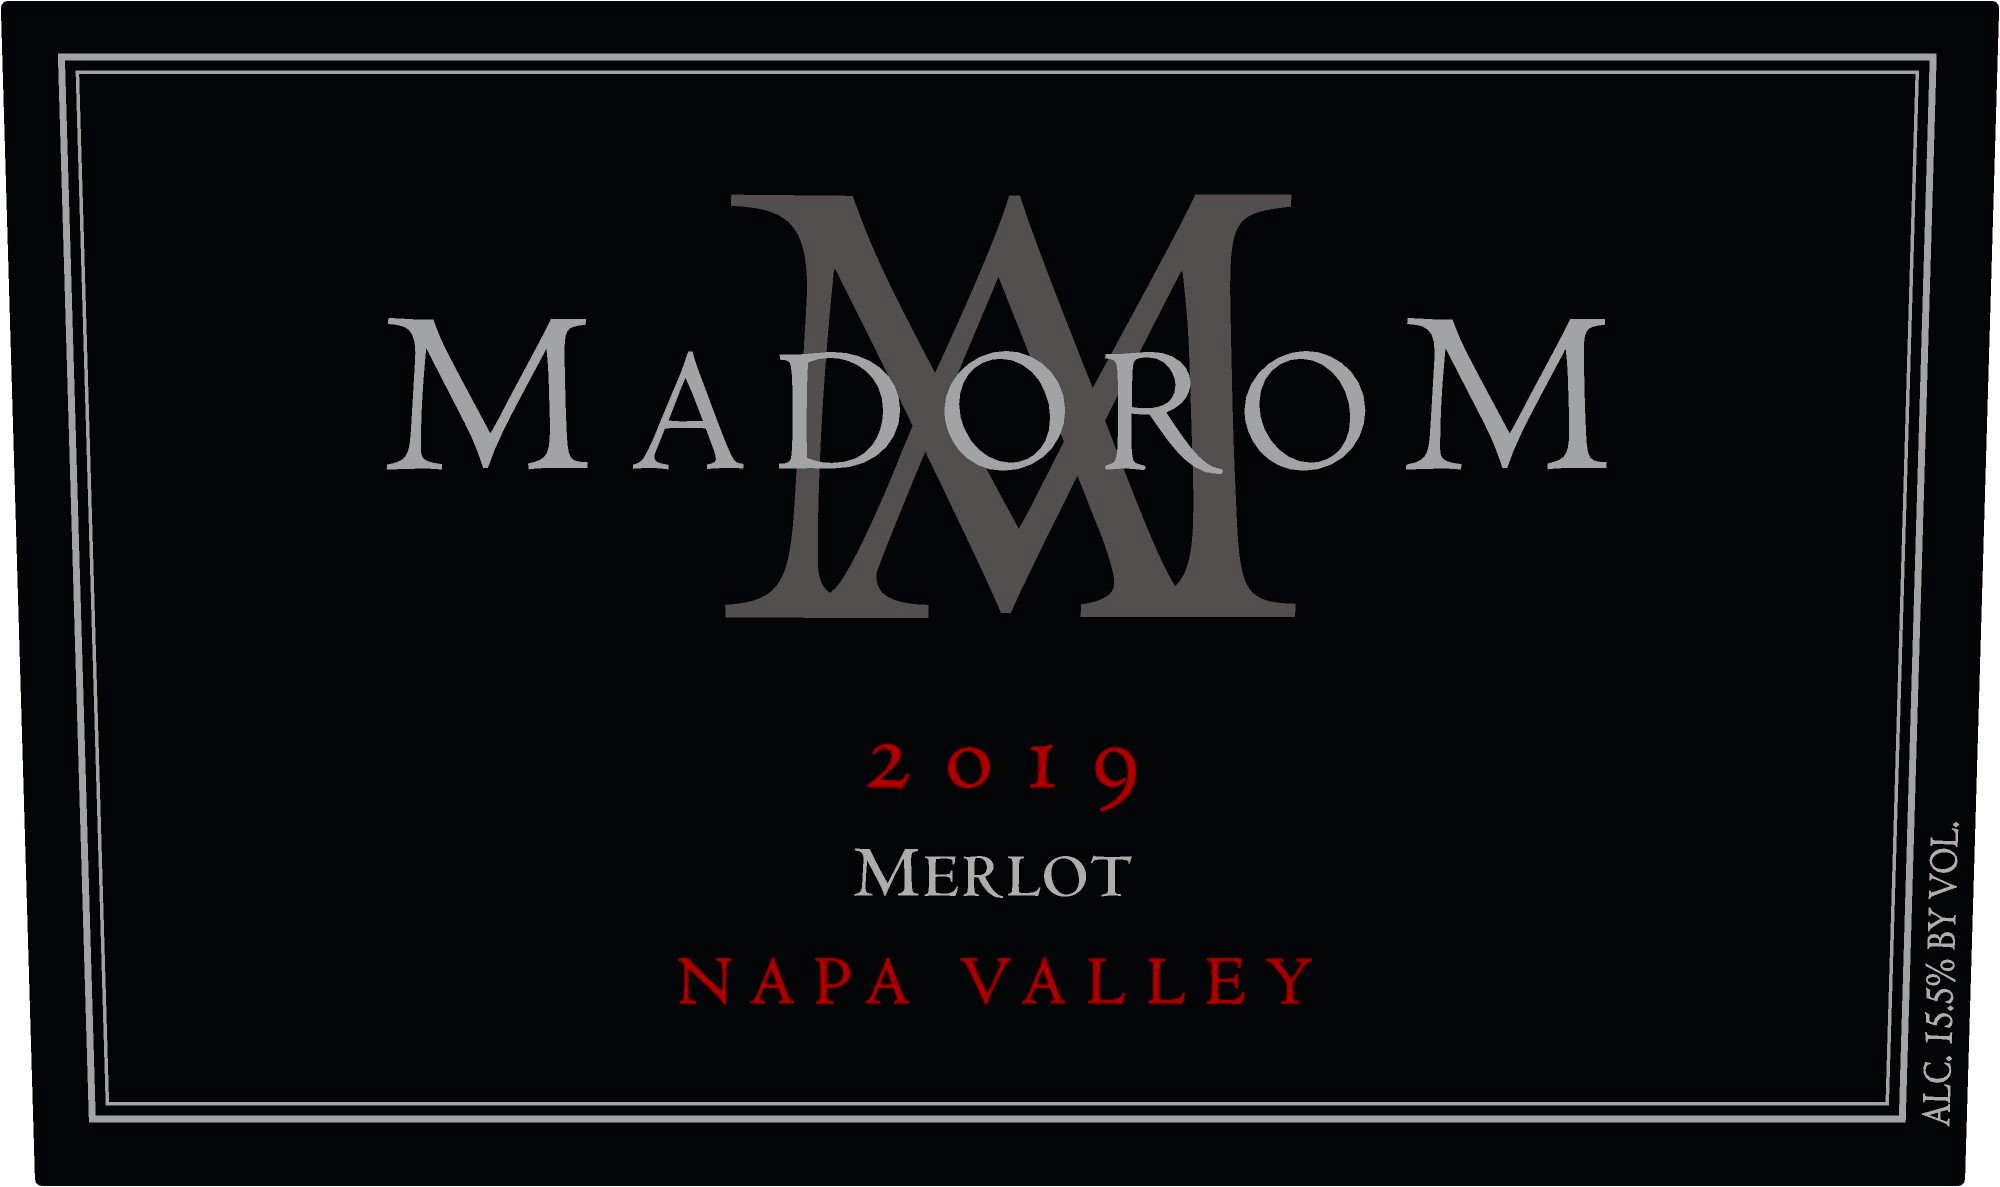 Product Image for 2019 MadoroM Napa Valley Merlot